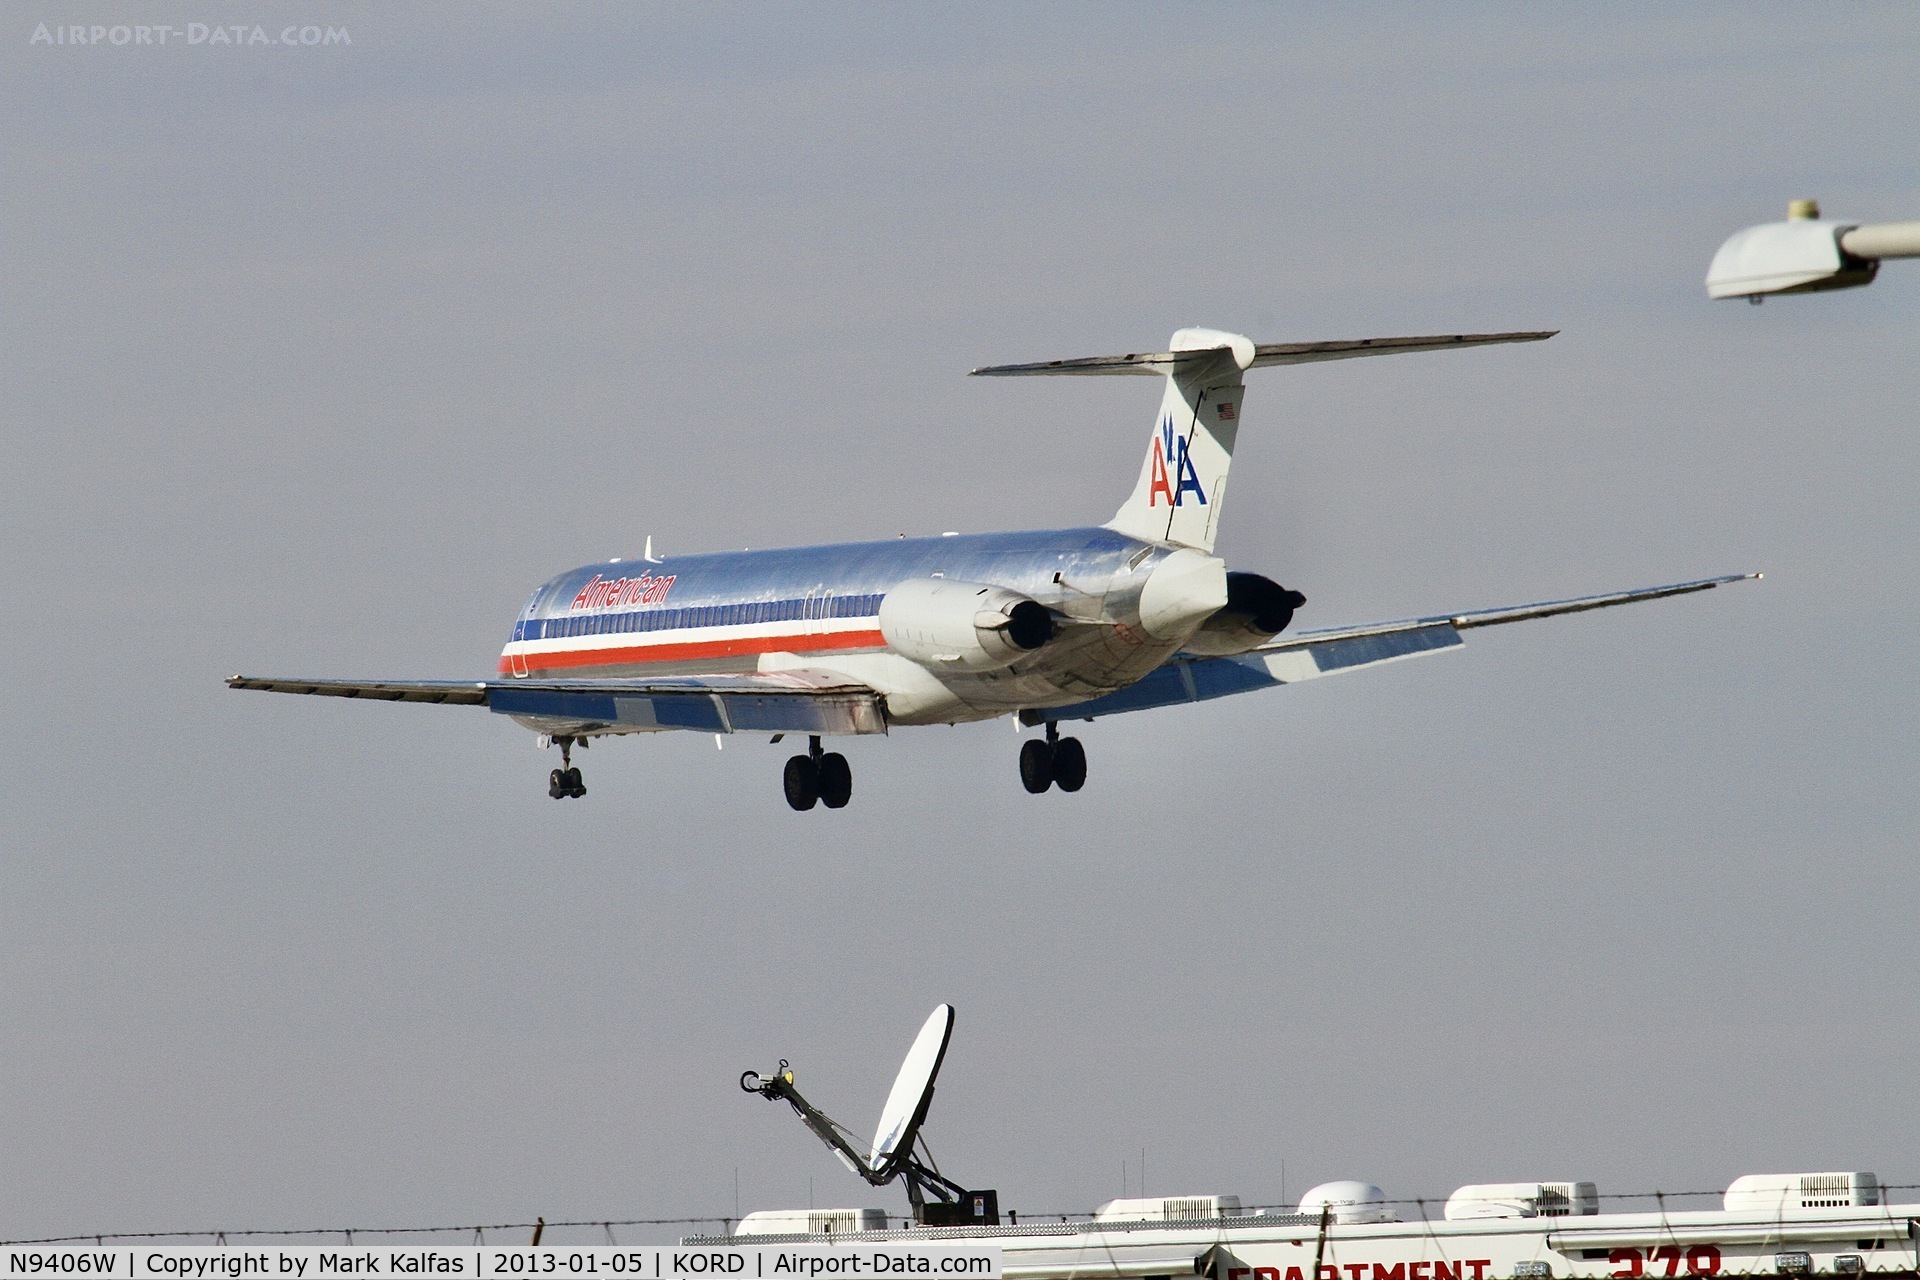 N9406W, 1992 McDonnell Douglas MD-83 (DC-9-83) C/N 53126, AMERICAN AIRLINES MD-83 N9406W 4WP, on approach KORD